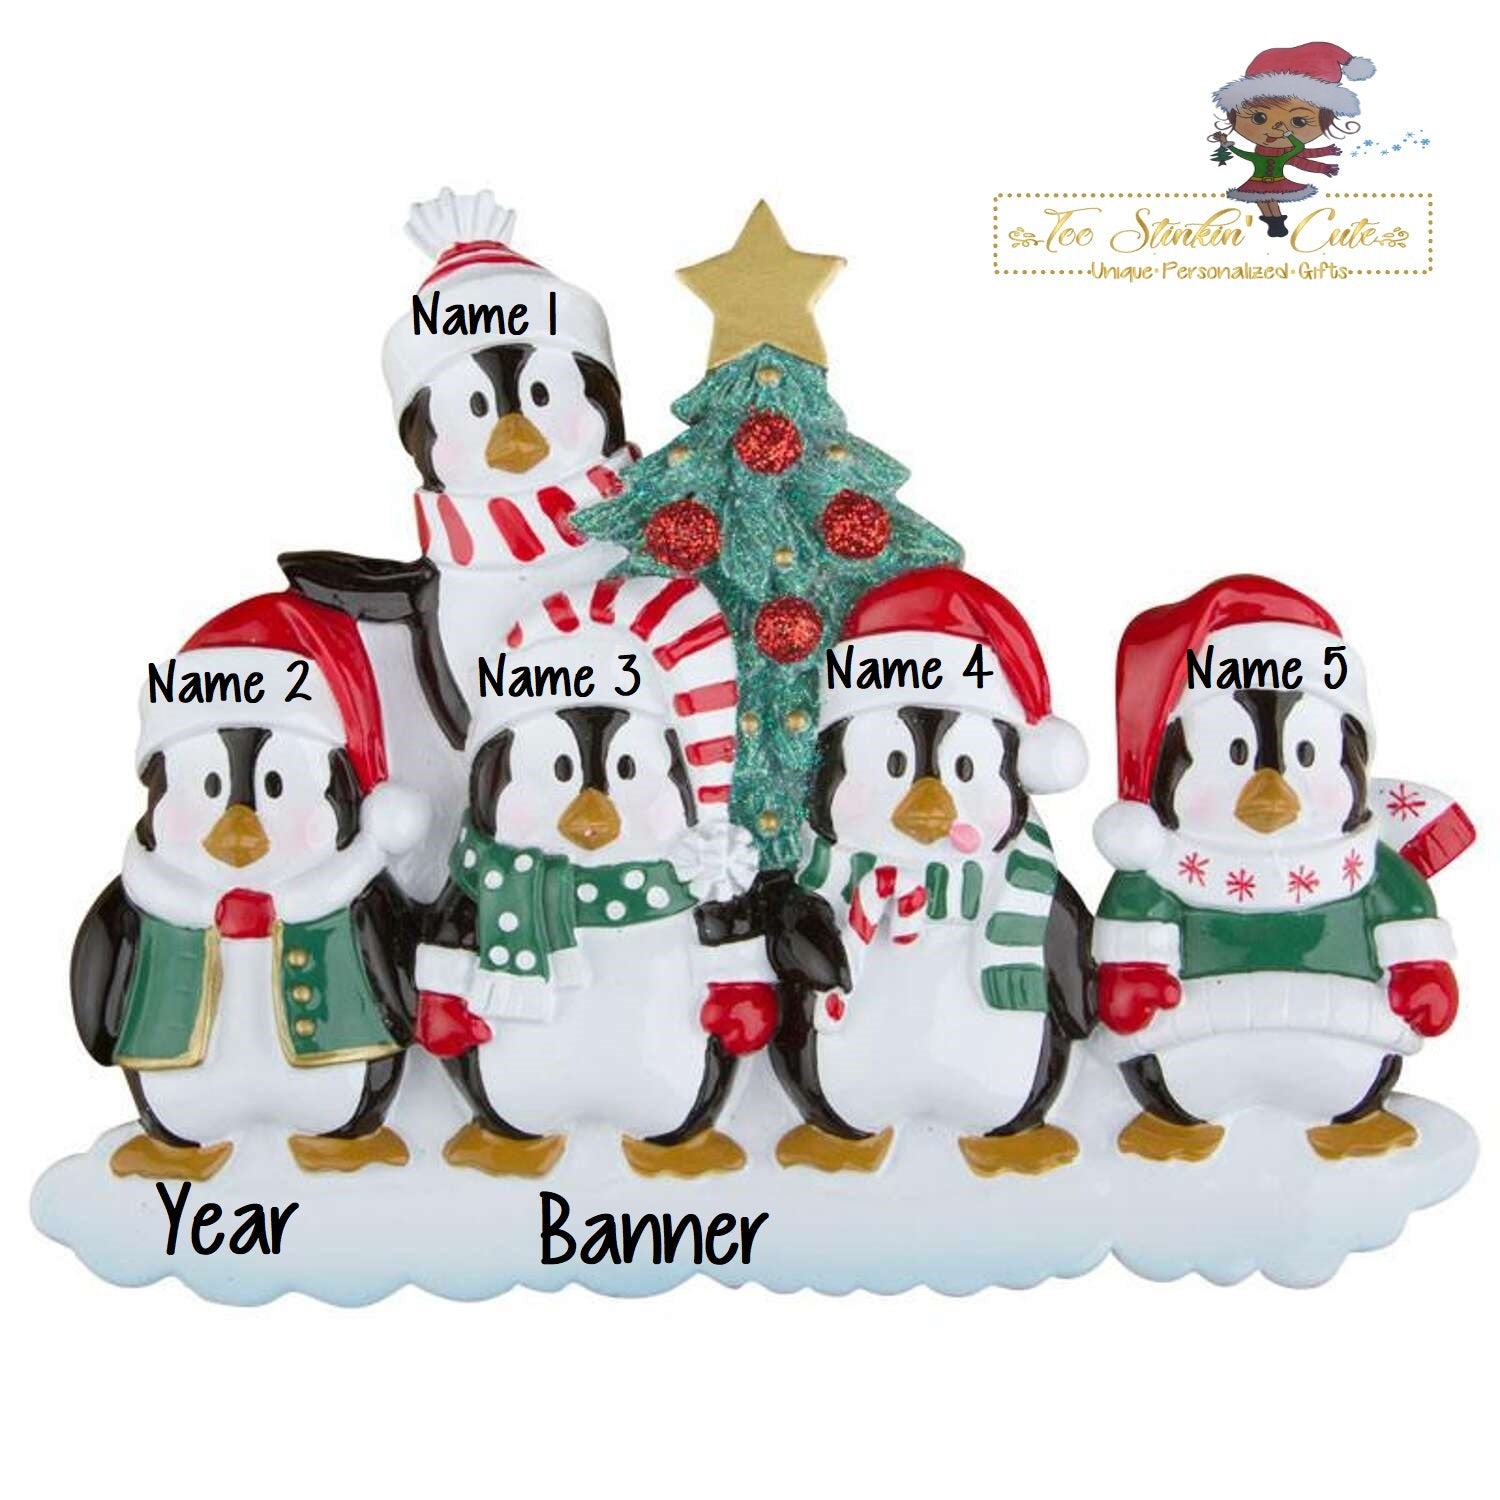 Personalized Christmas Table Topper Penguin Tree Family of 5+ Free Shipping!